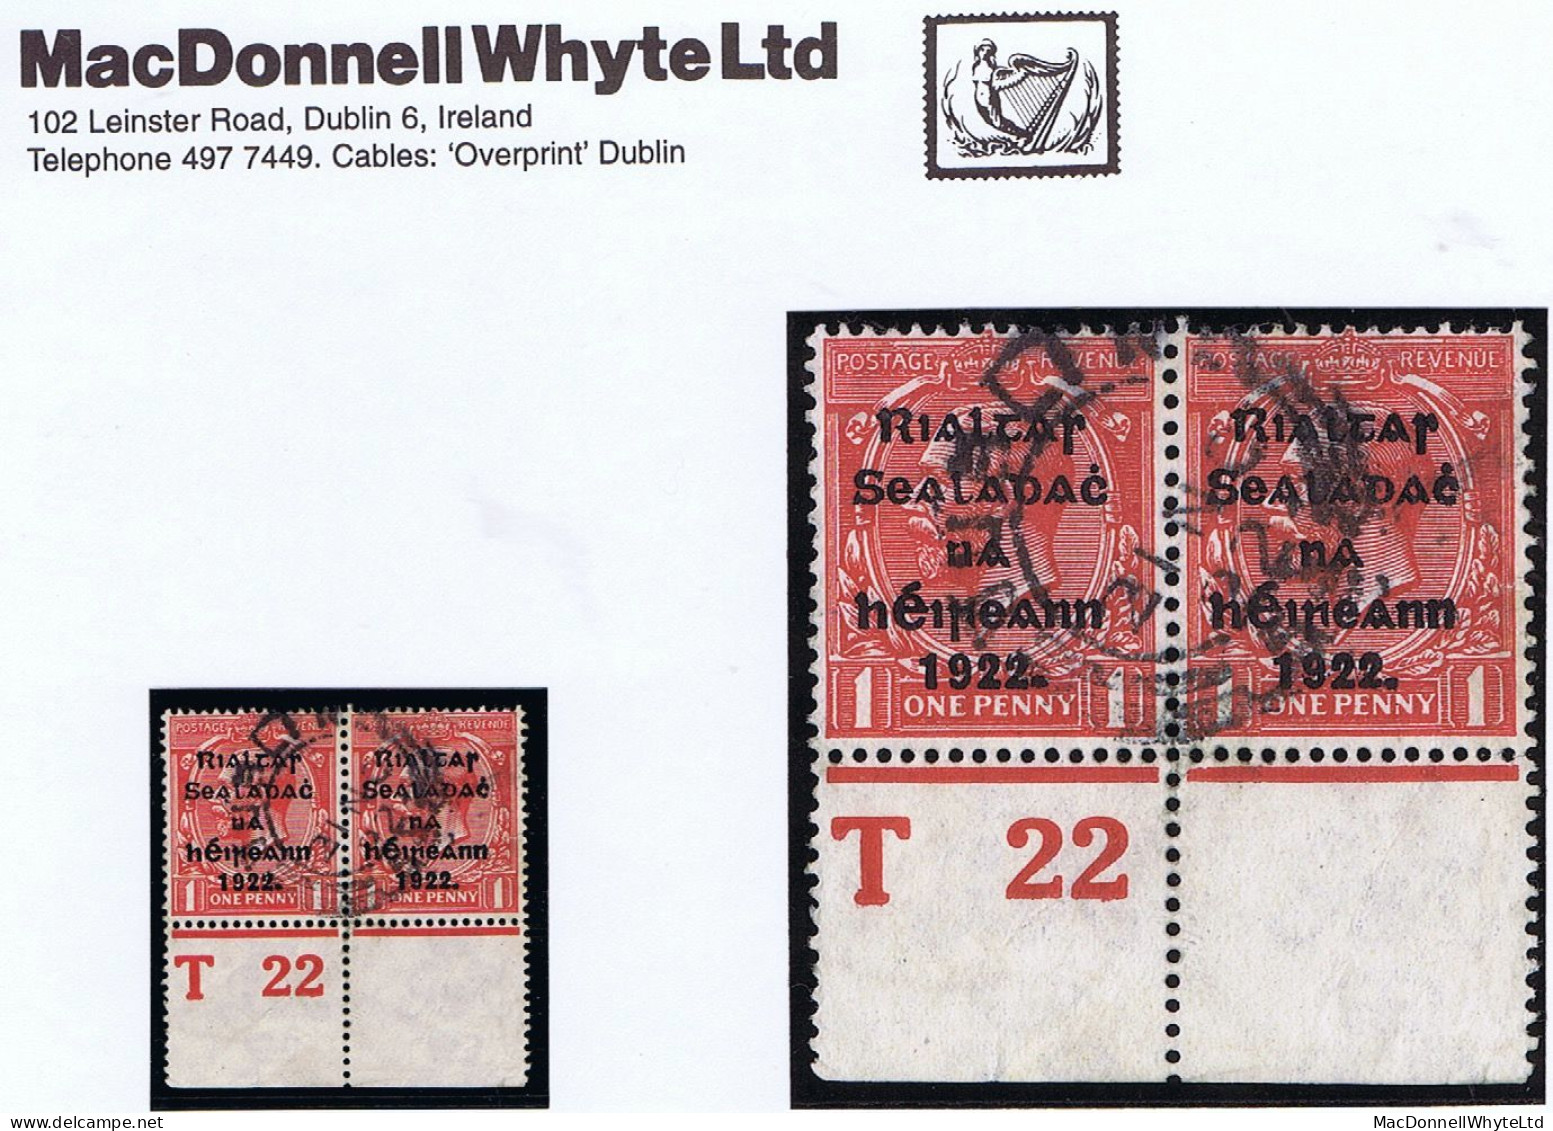 Ireland 1922 Thom Rialtas 5-line Overprint In Blue-black On 1d, Control T22 Perf, Pair Used Cds DUBLIN 21 NO 22 - Used Stamps